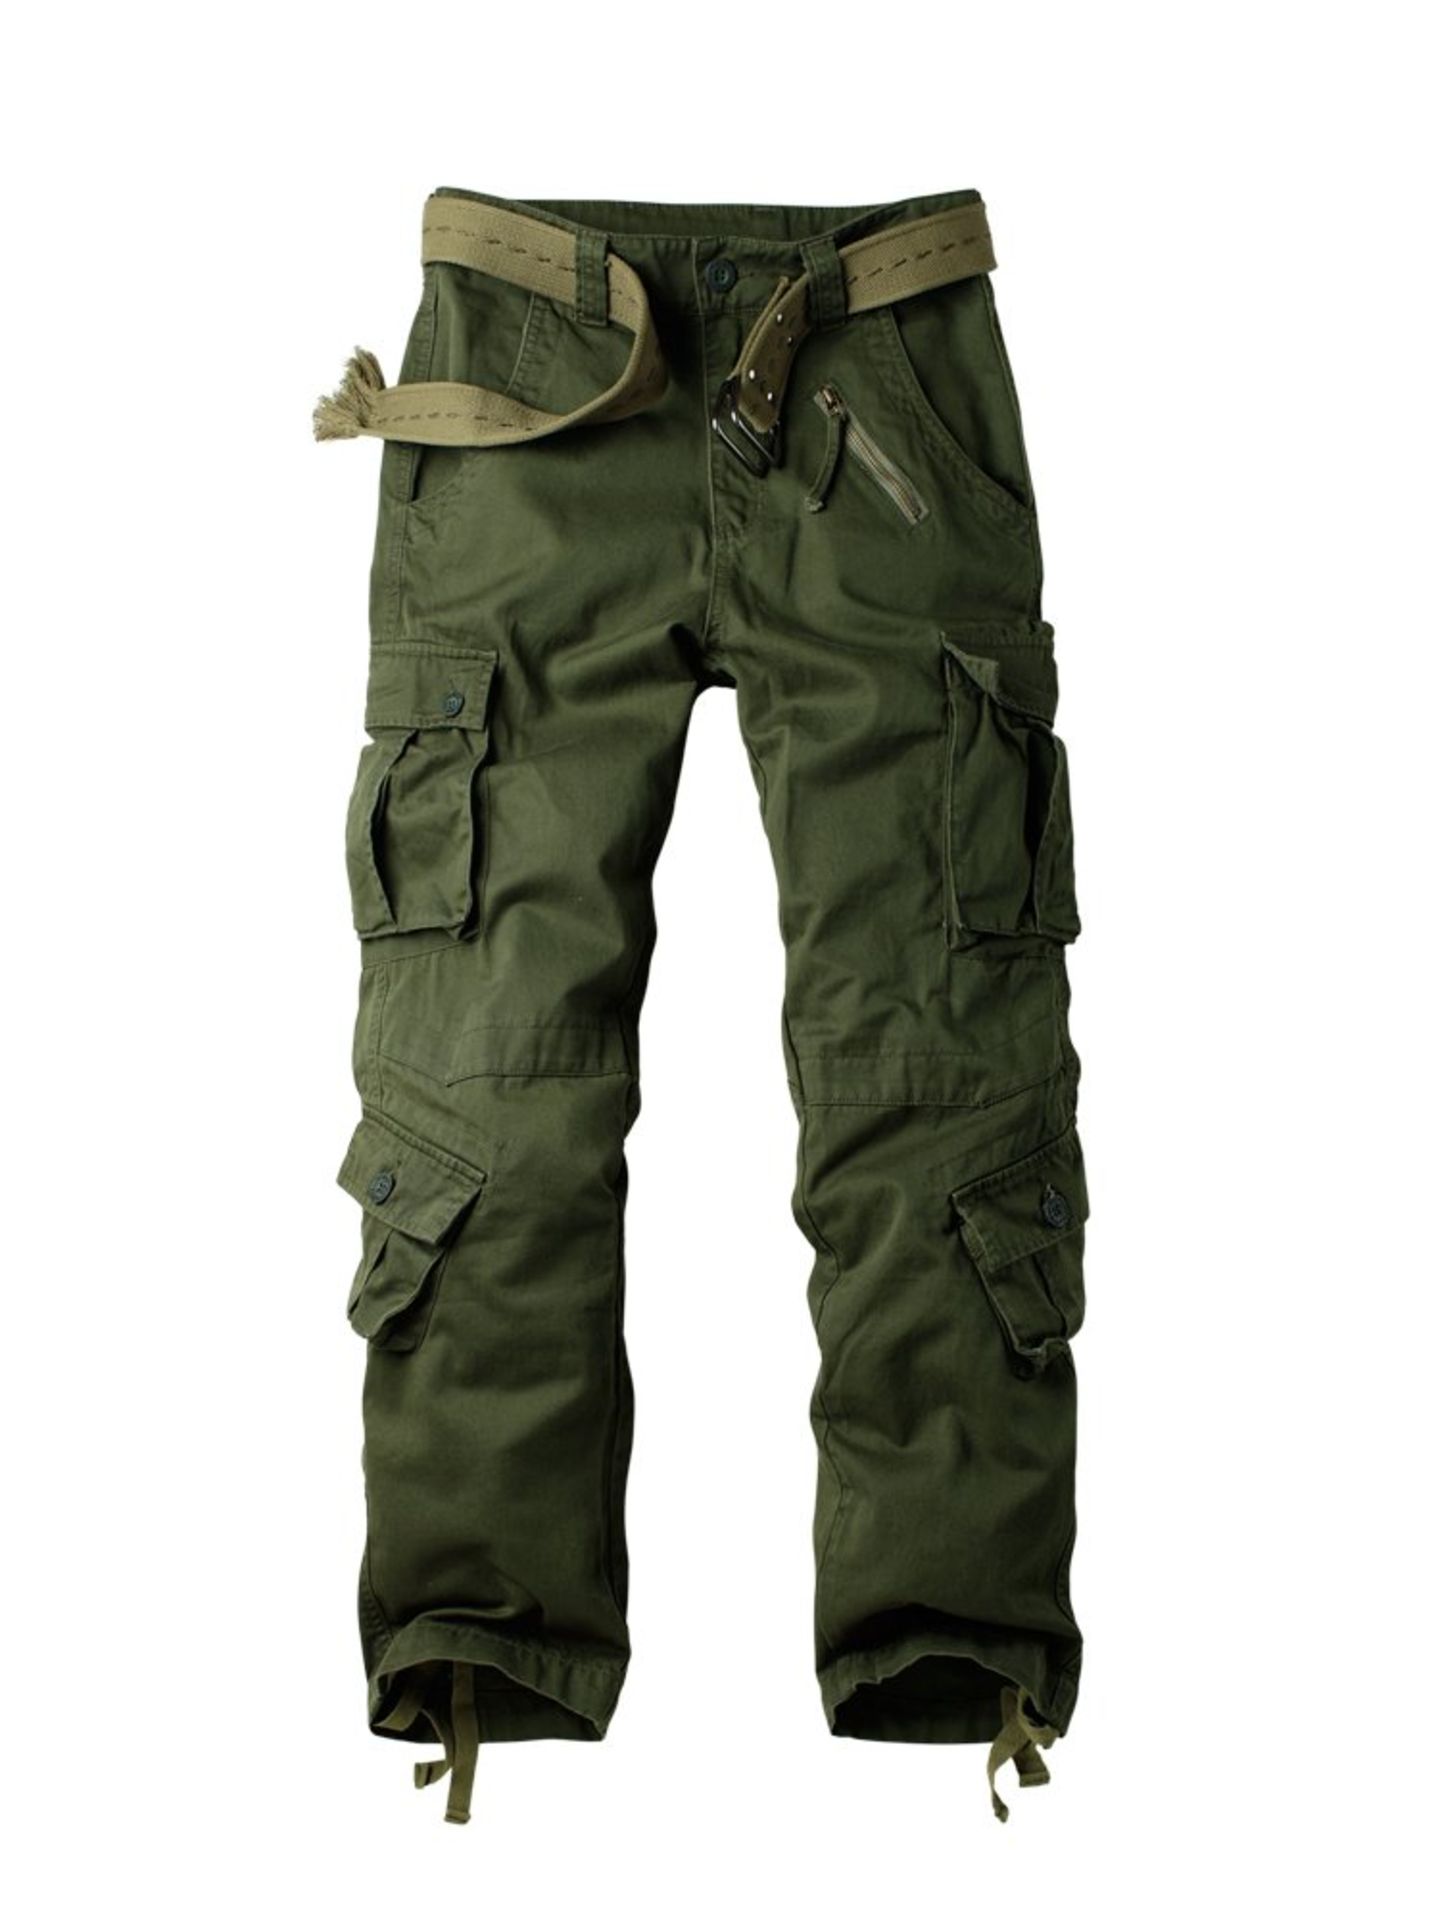 RRP £38.24 Aeslech Mens Cargo Work Combat Trousers Tactical Army